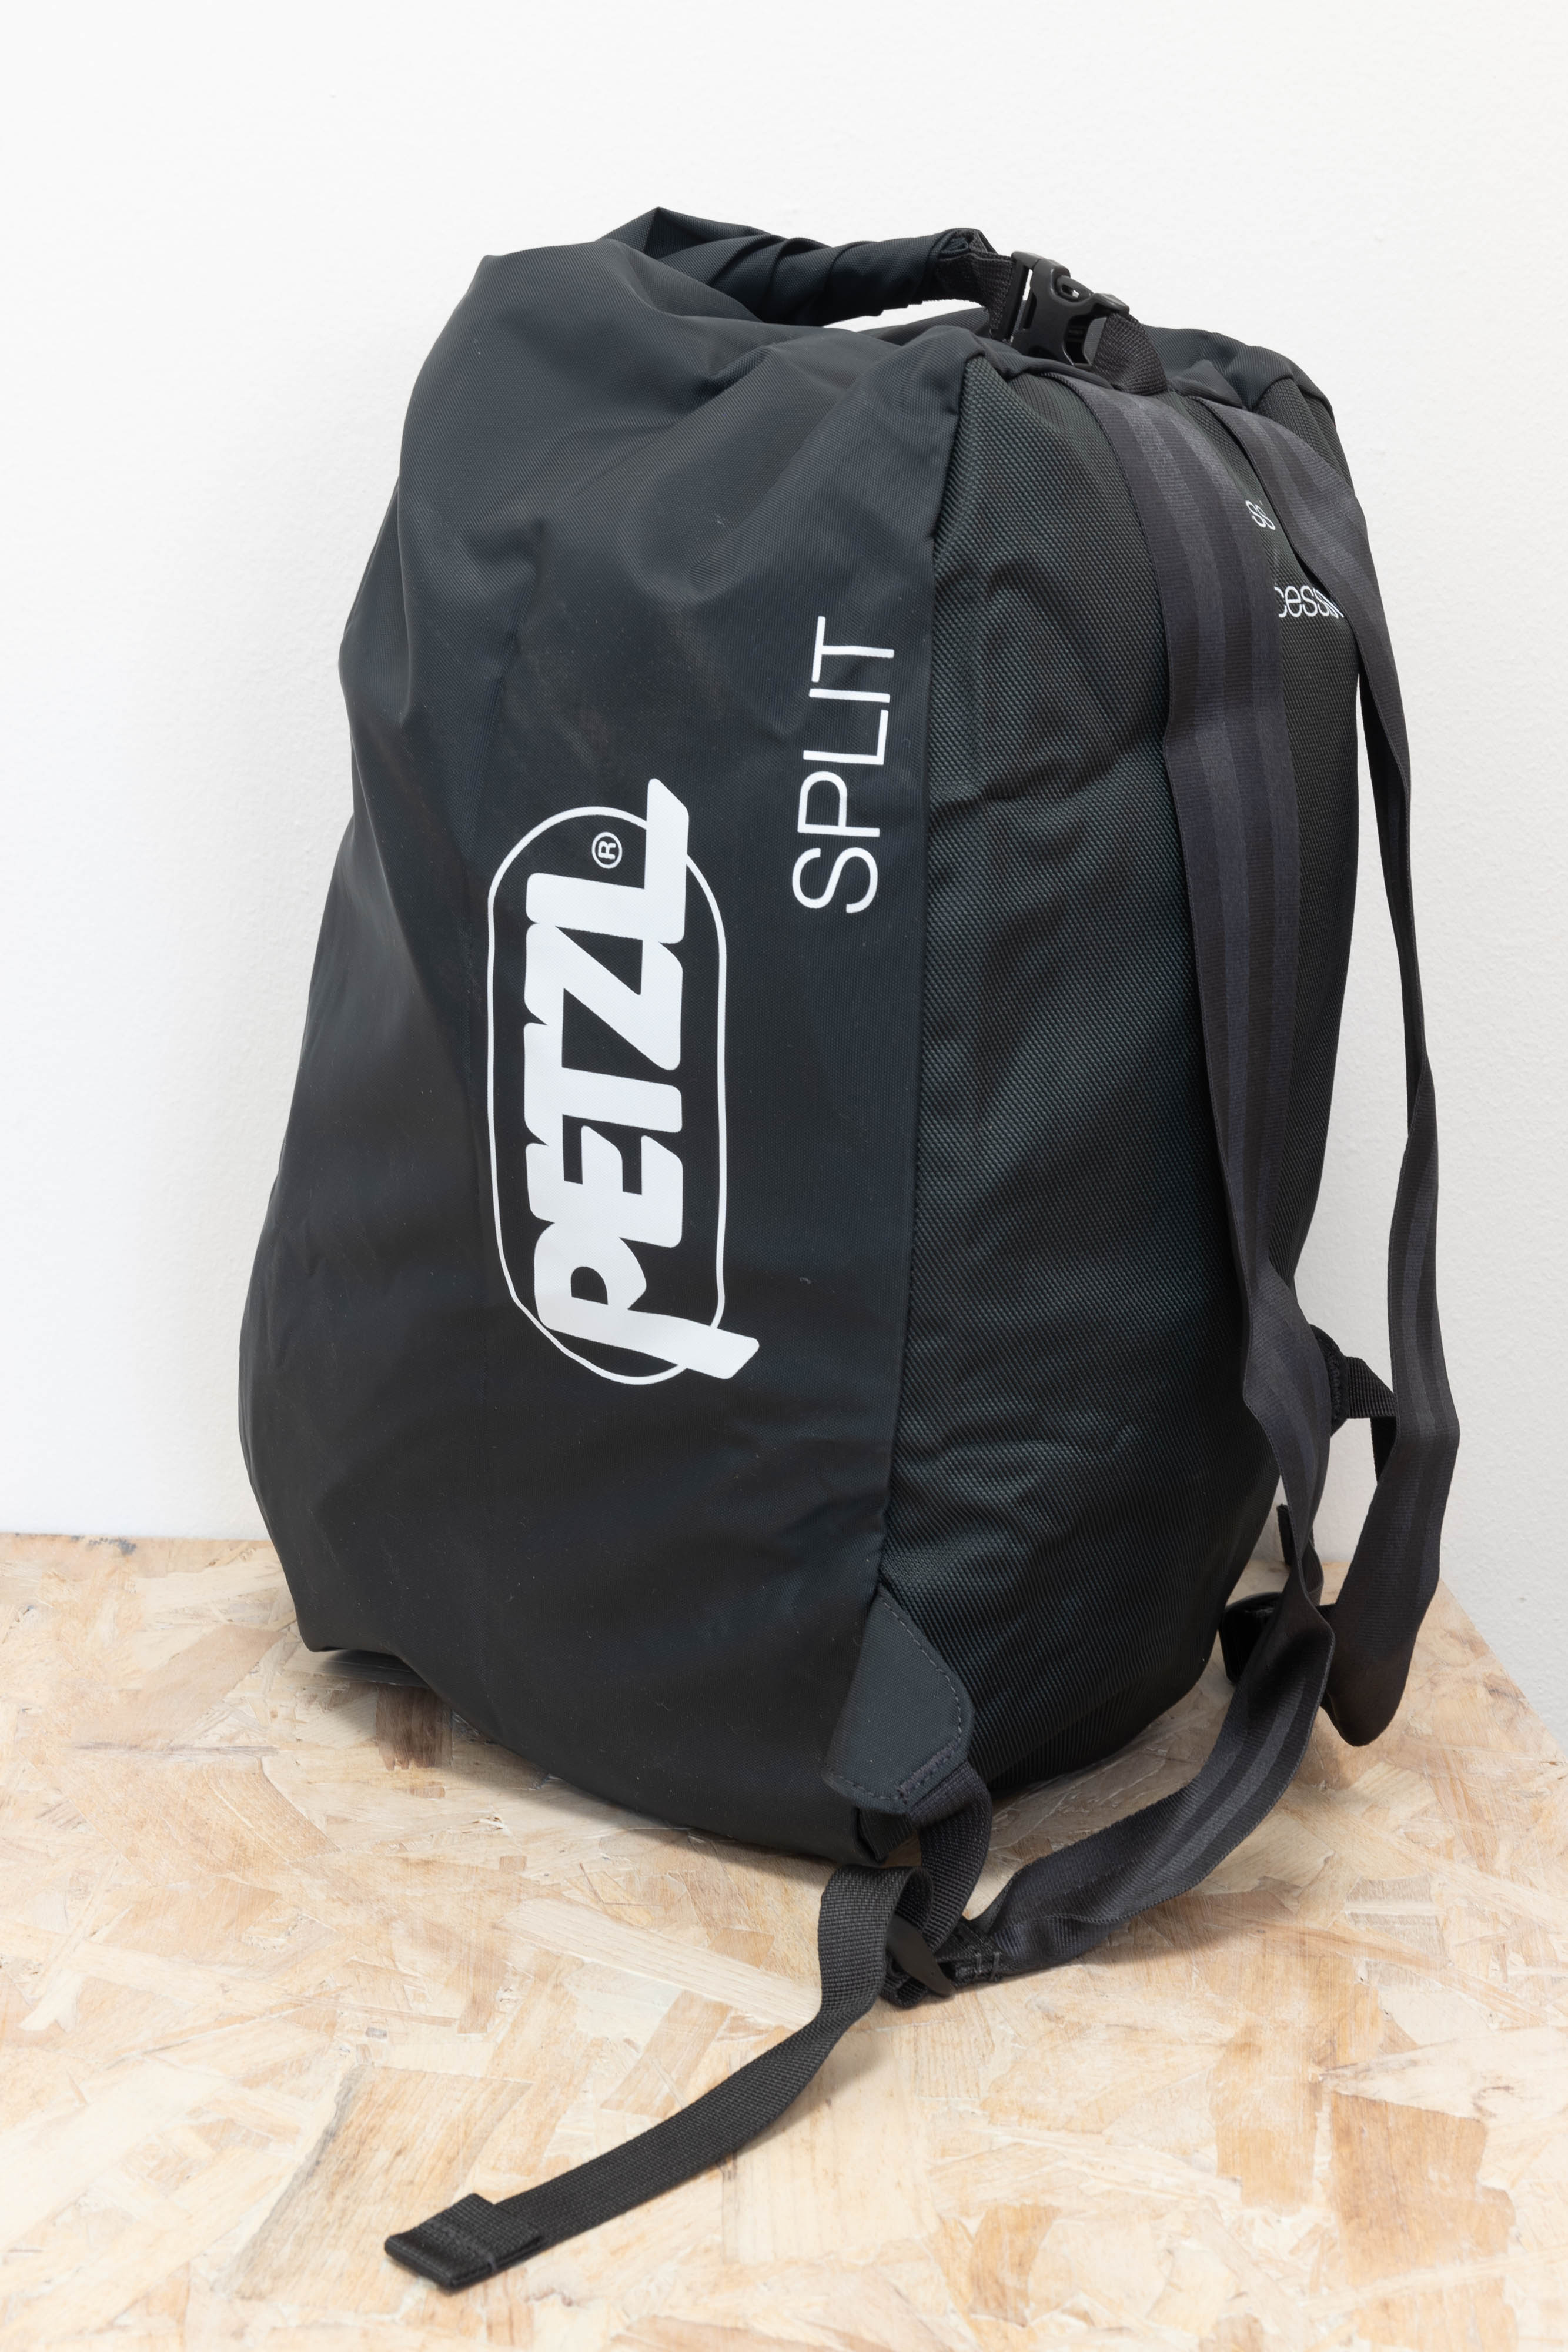 PETZL - Kab Rope Bag, Gray, 26 liters : Amazon.in: Sports, Fitness &  Outdoors